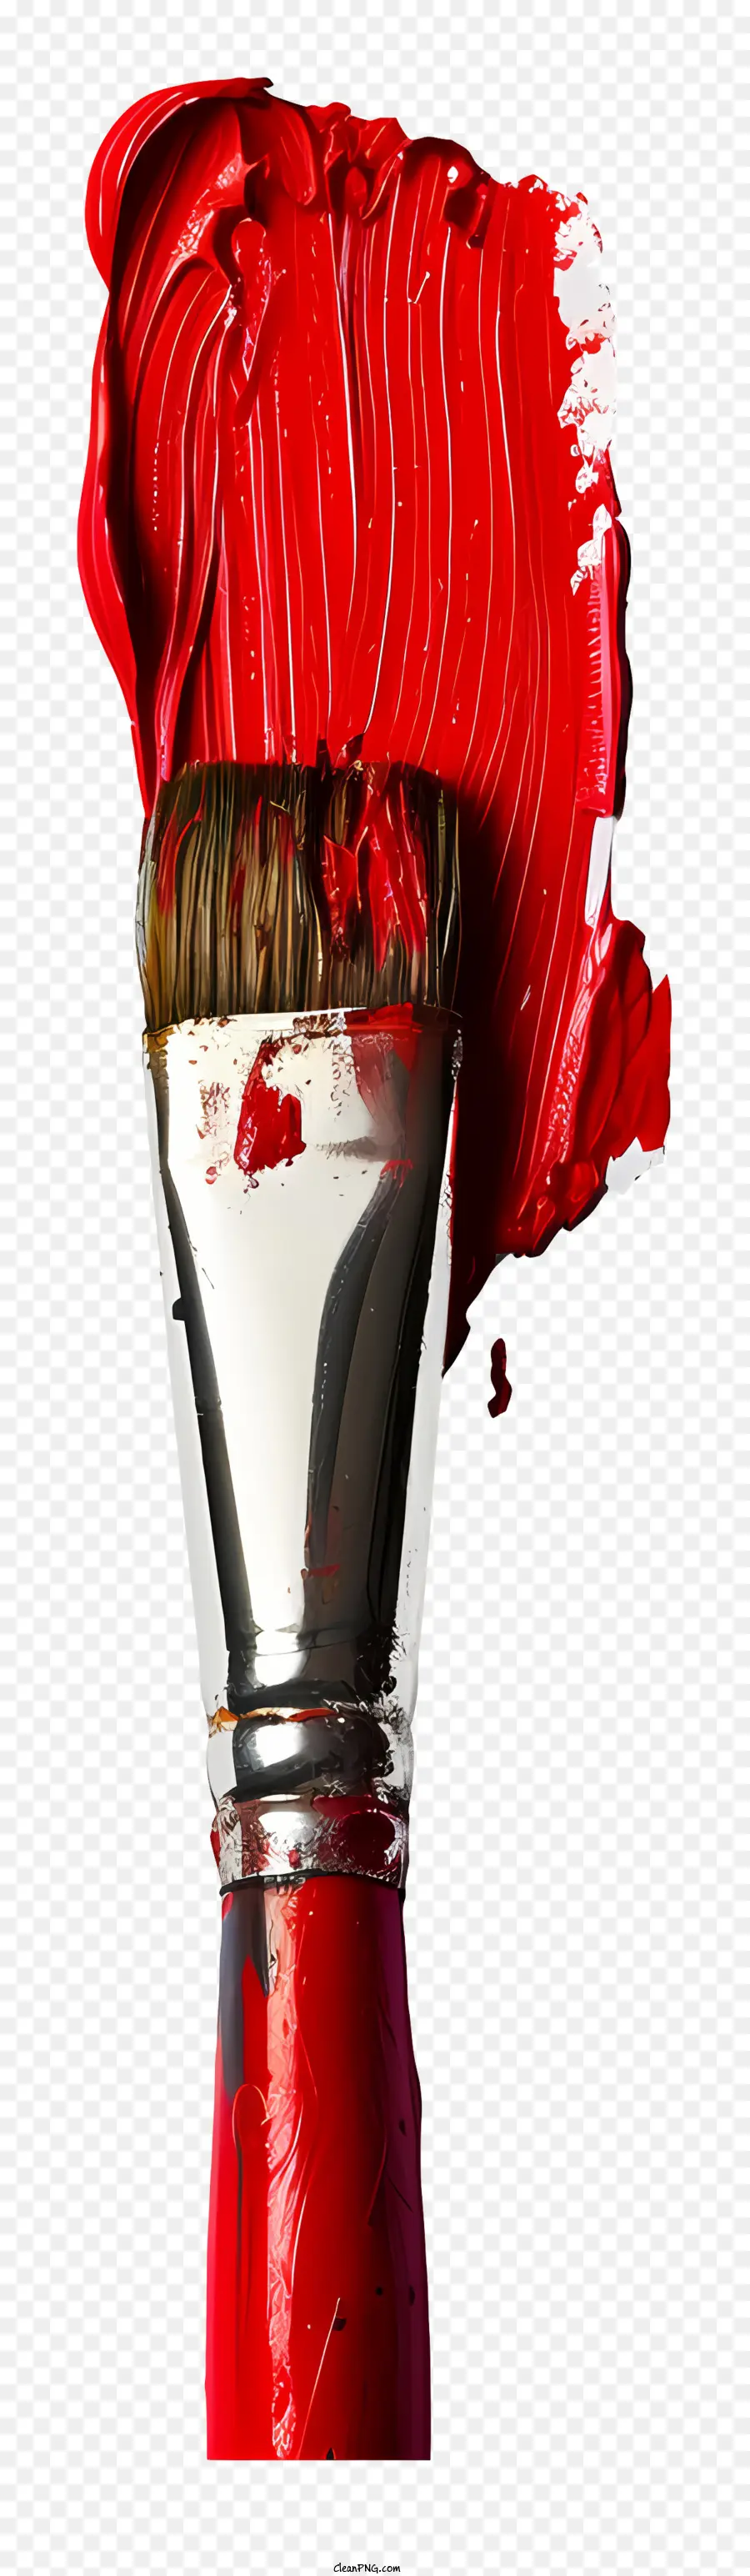 red brush red paintbrush paint dripping silver handle bristles